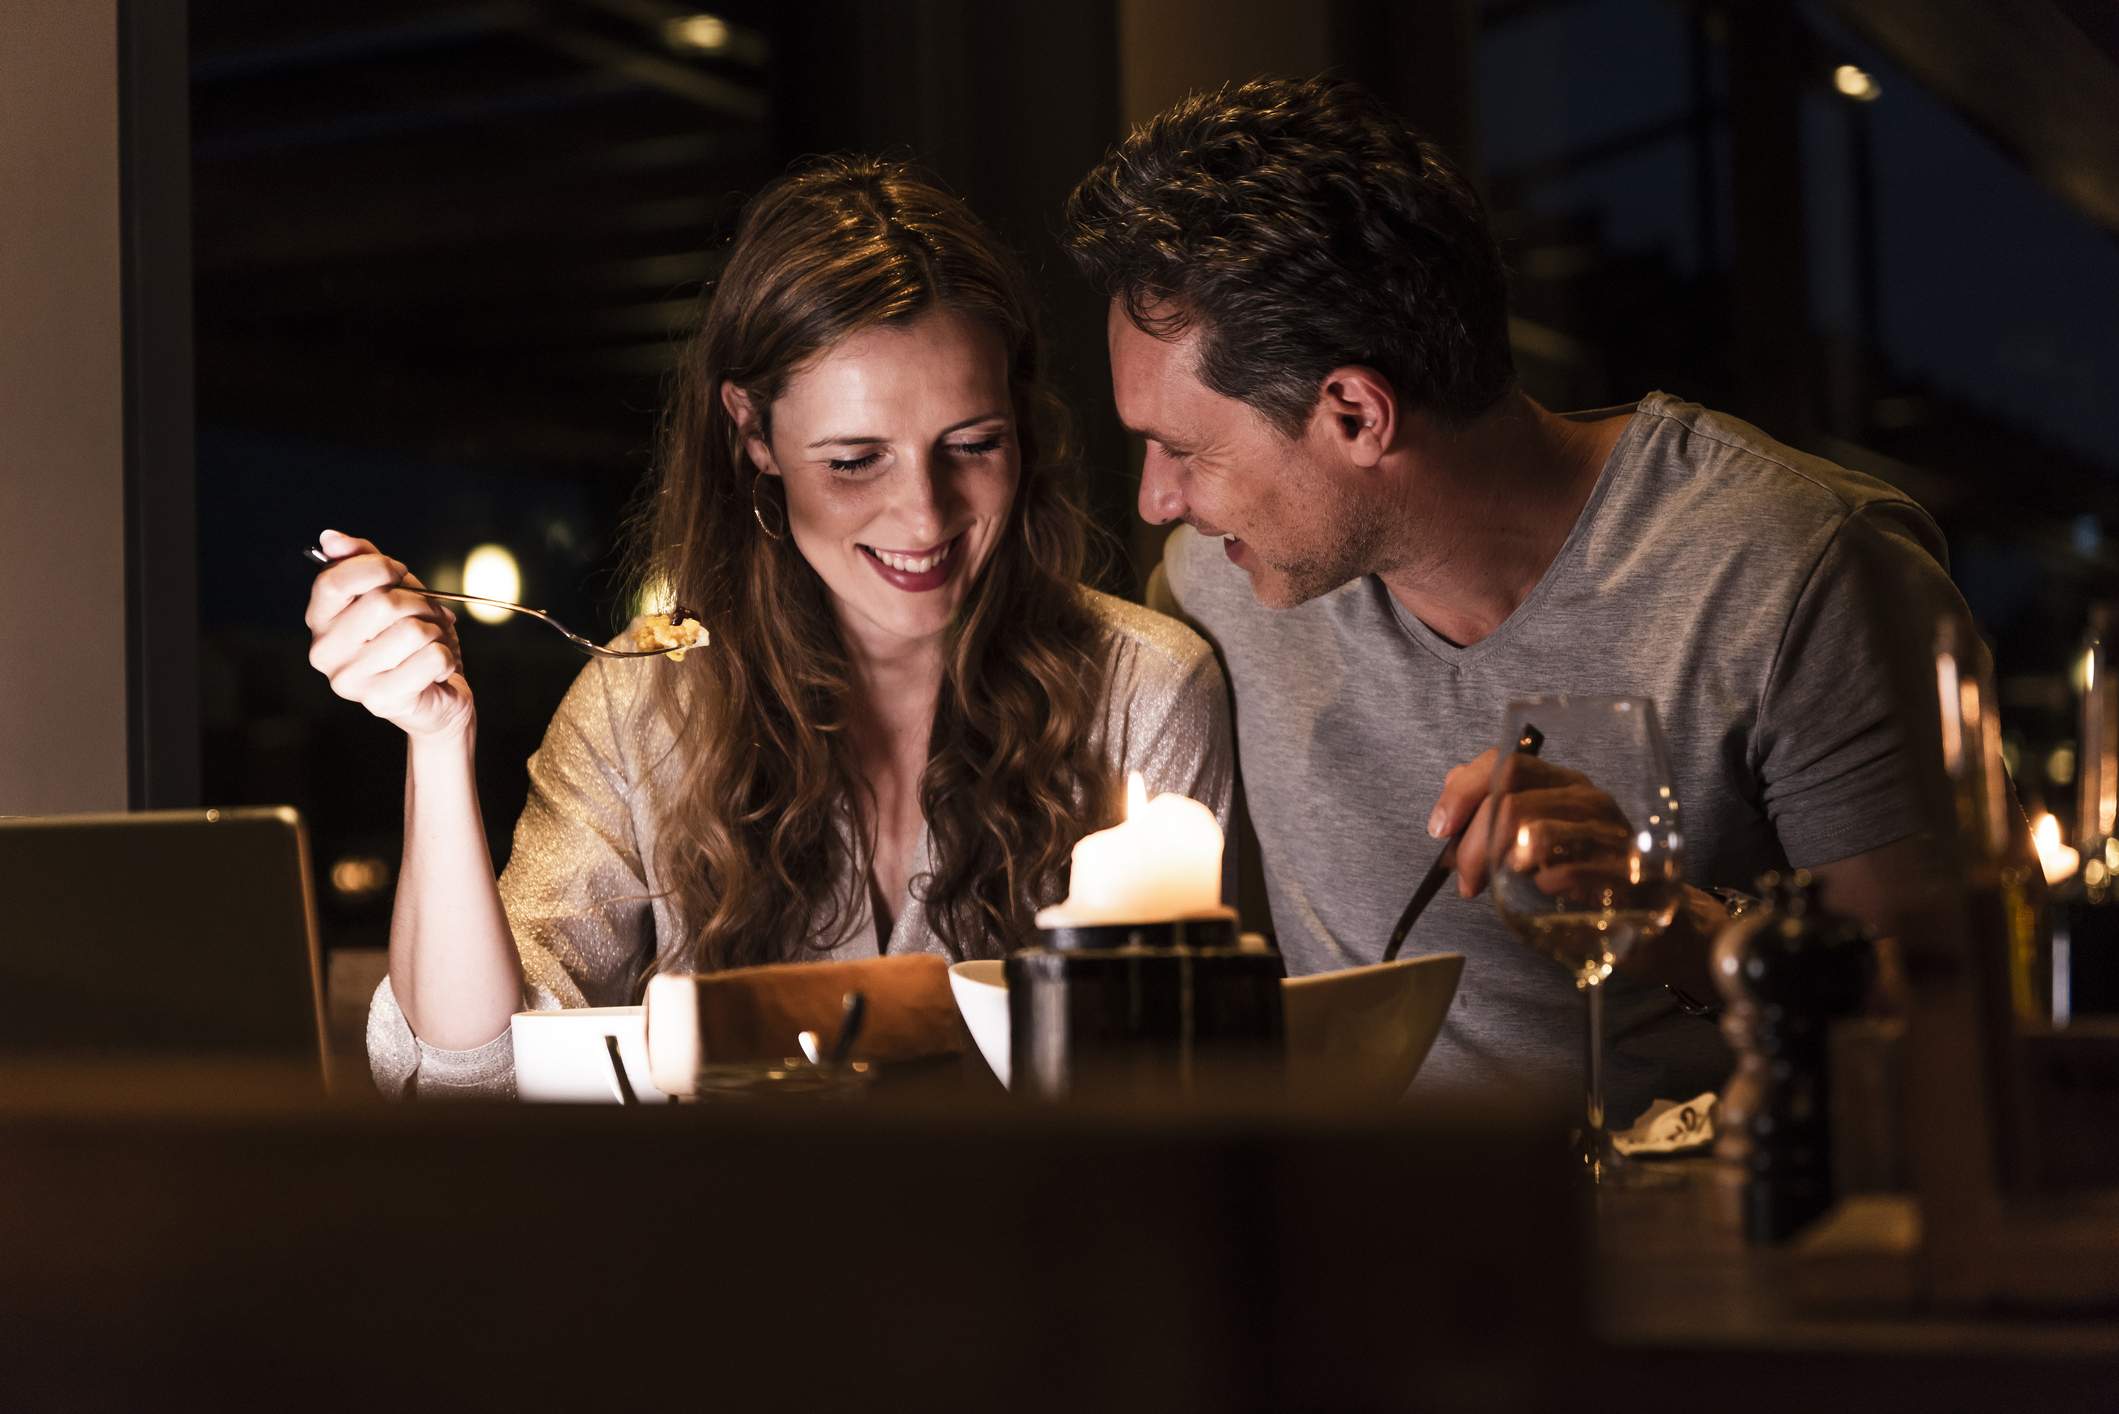 Image depicts two people sitting next to each other at a restaurant. They are sharing food and smiling. 